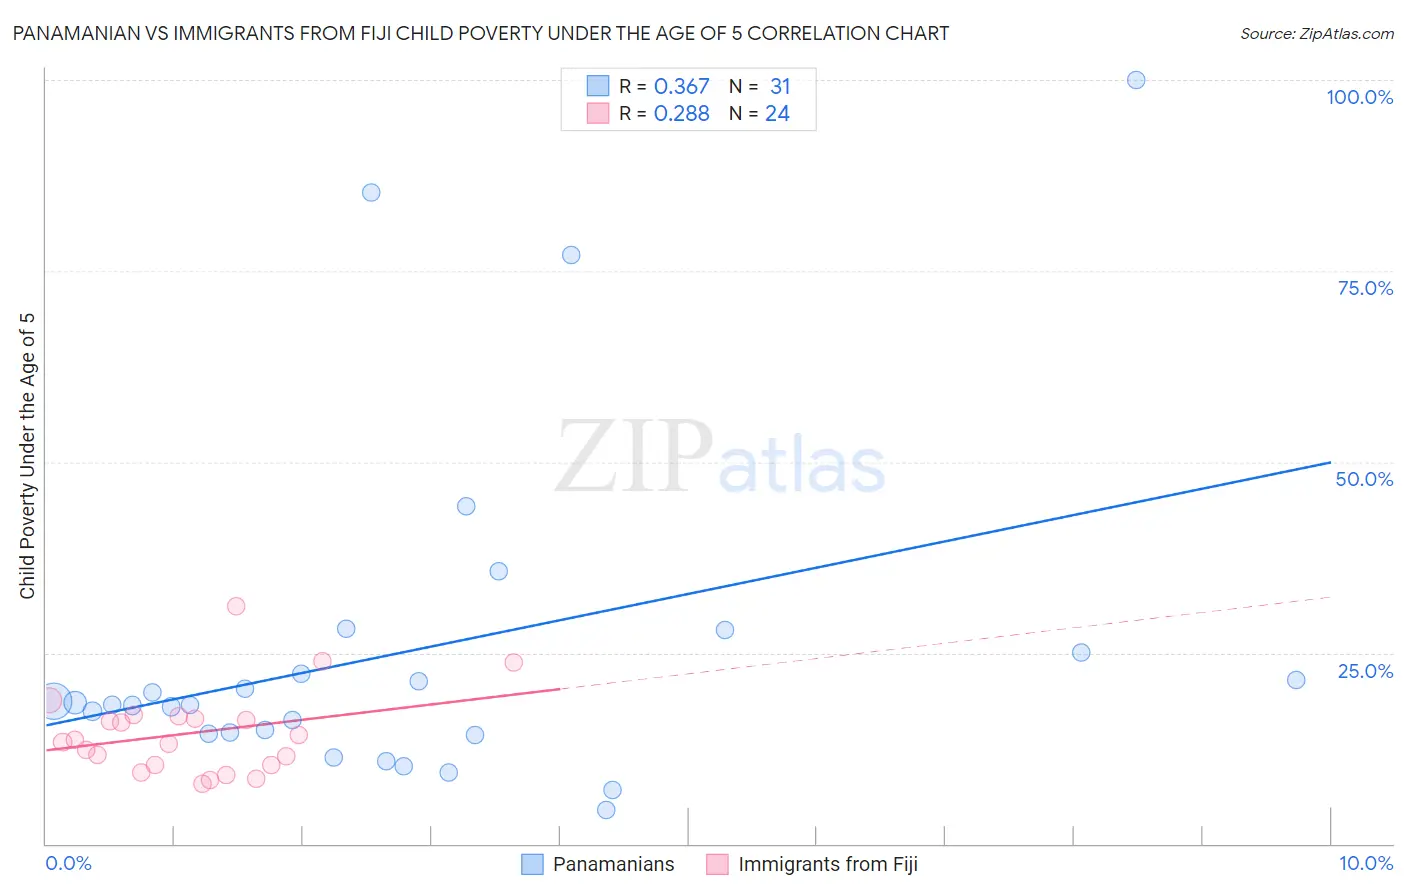 Panamanian vs Immigrants from Fiji Child Poverty Under the Age of 5